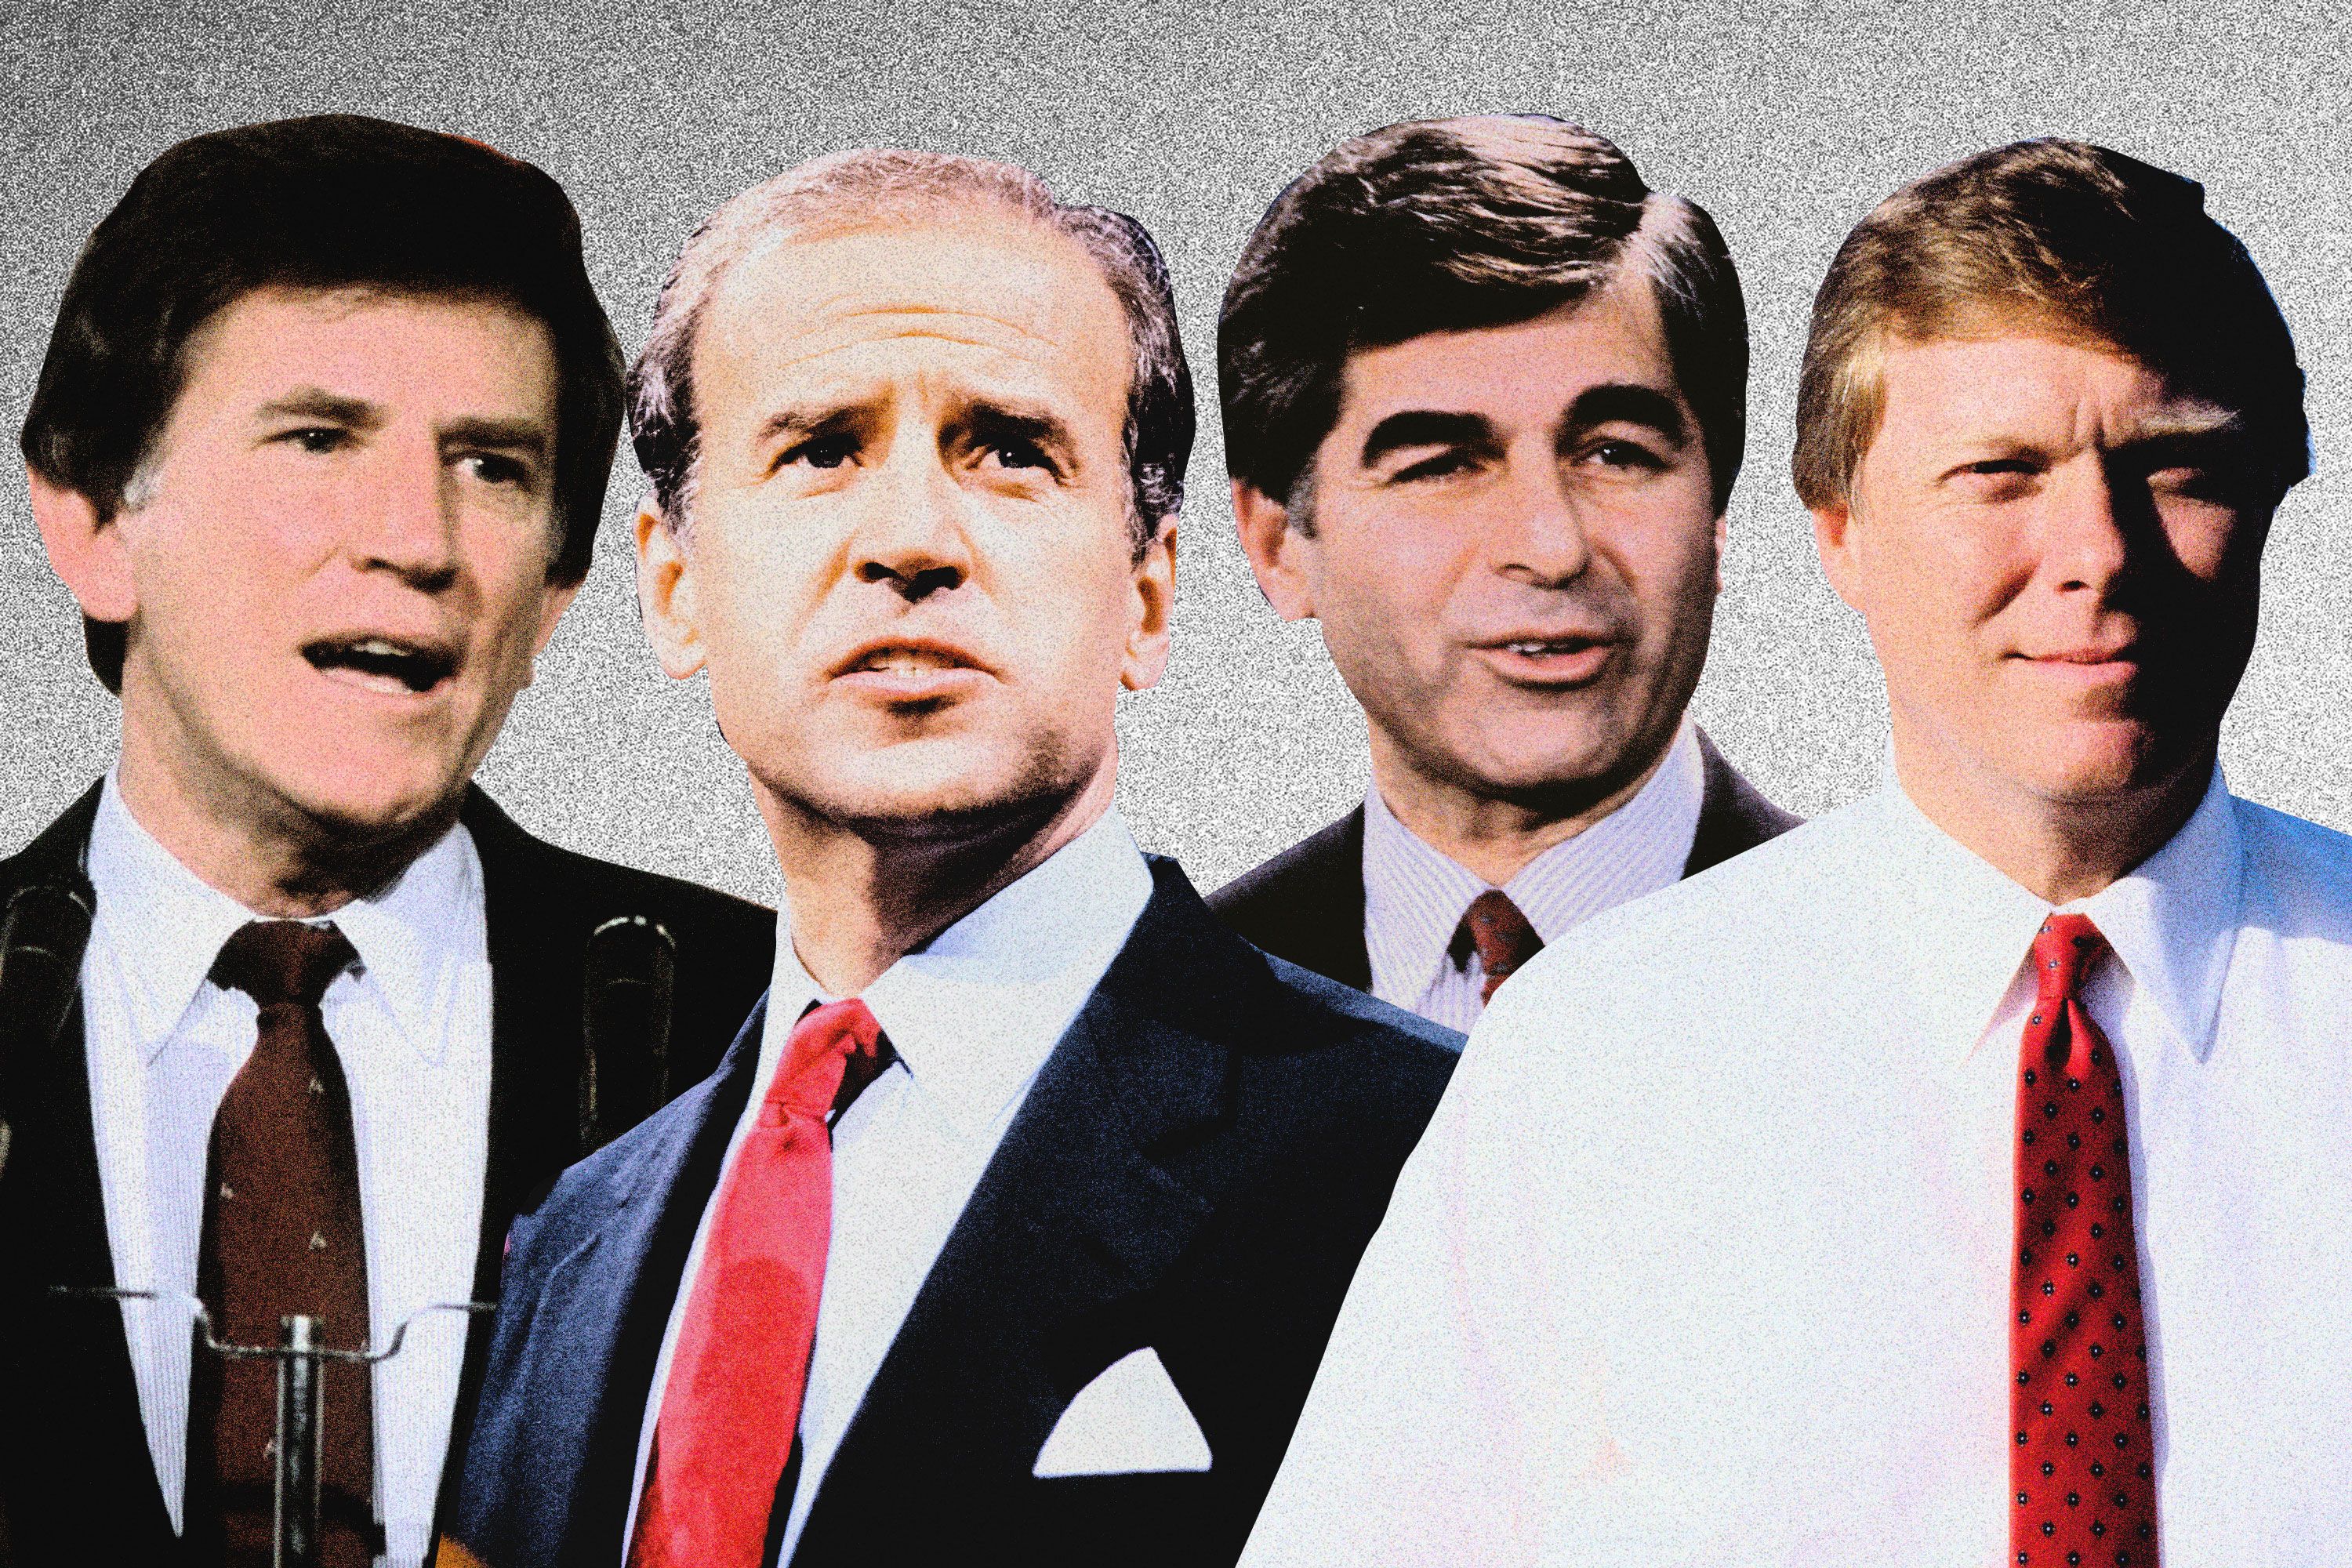 What Joe Biden's 1988 White House Rivals Think of Him Now